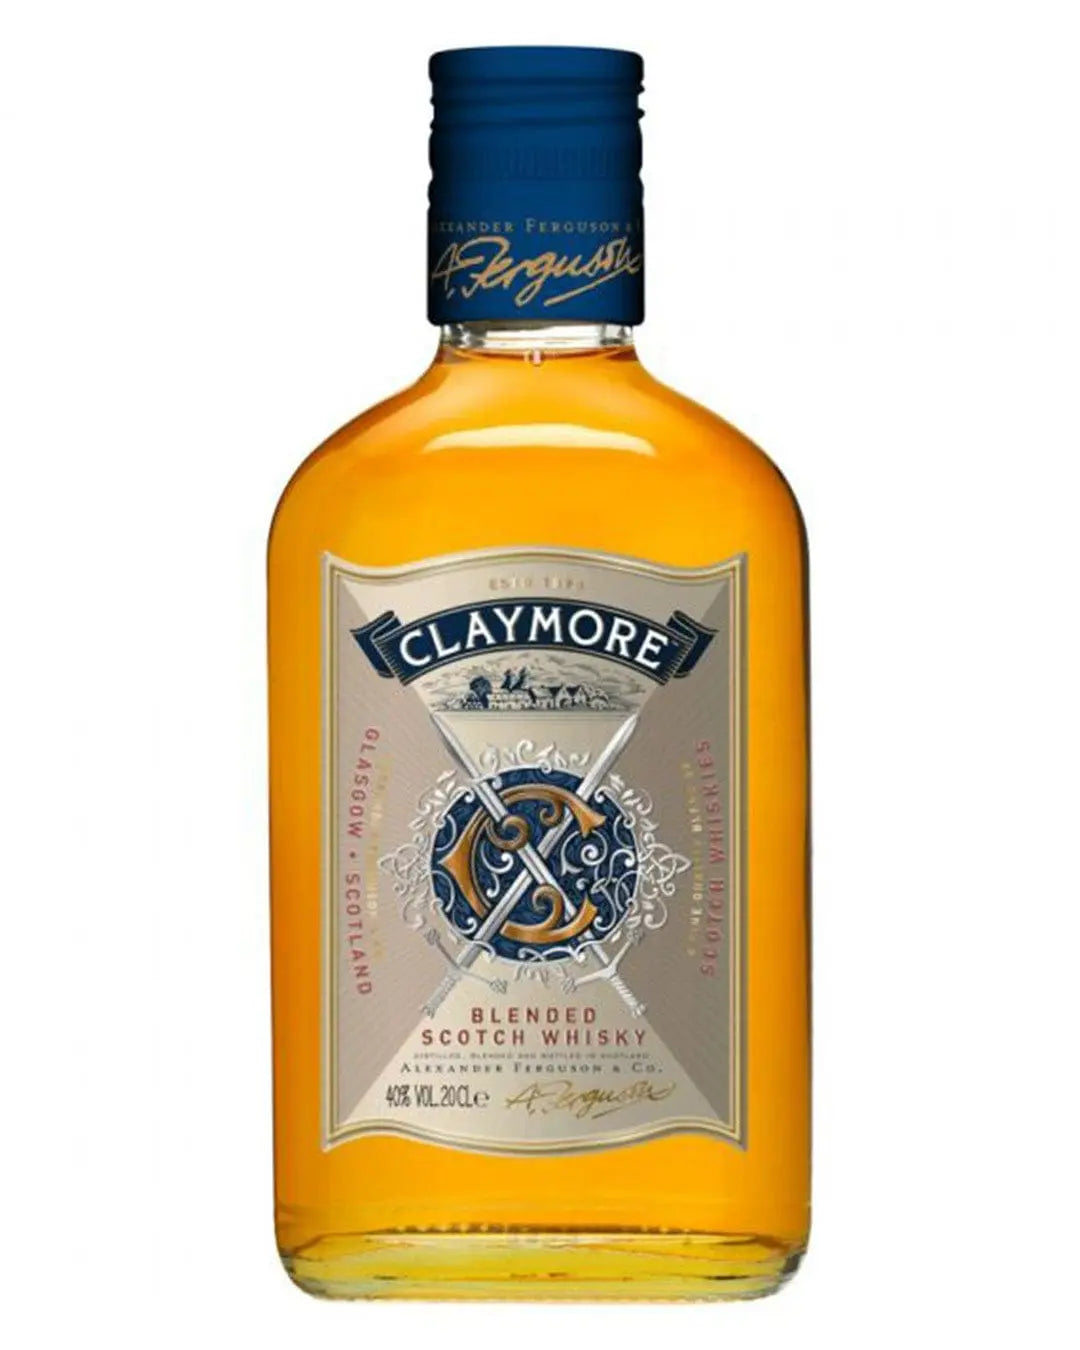 Claymore Blended Scotch Whisky, 20 cl Whisky 5010196021180